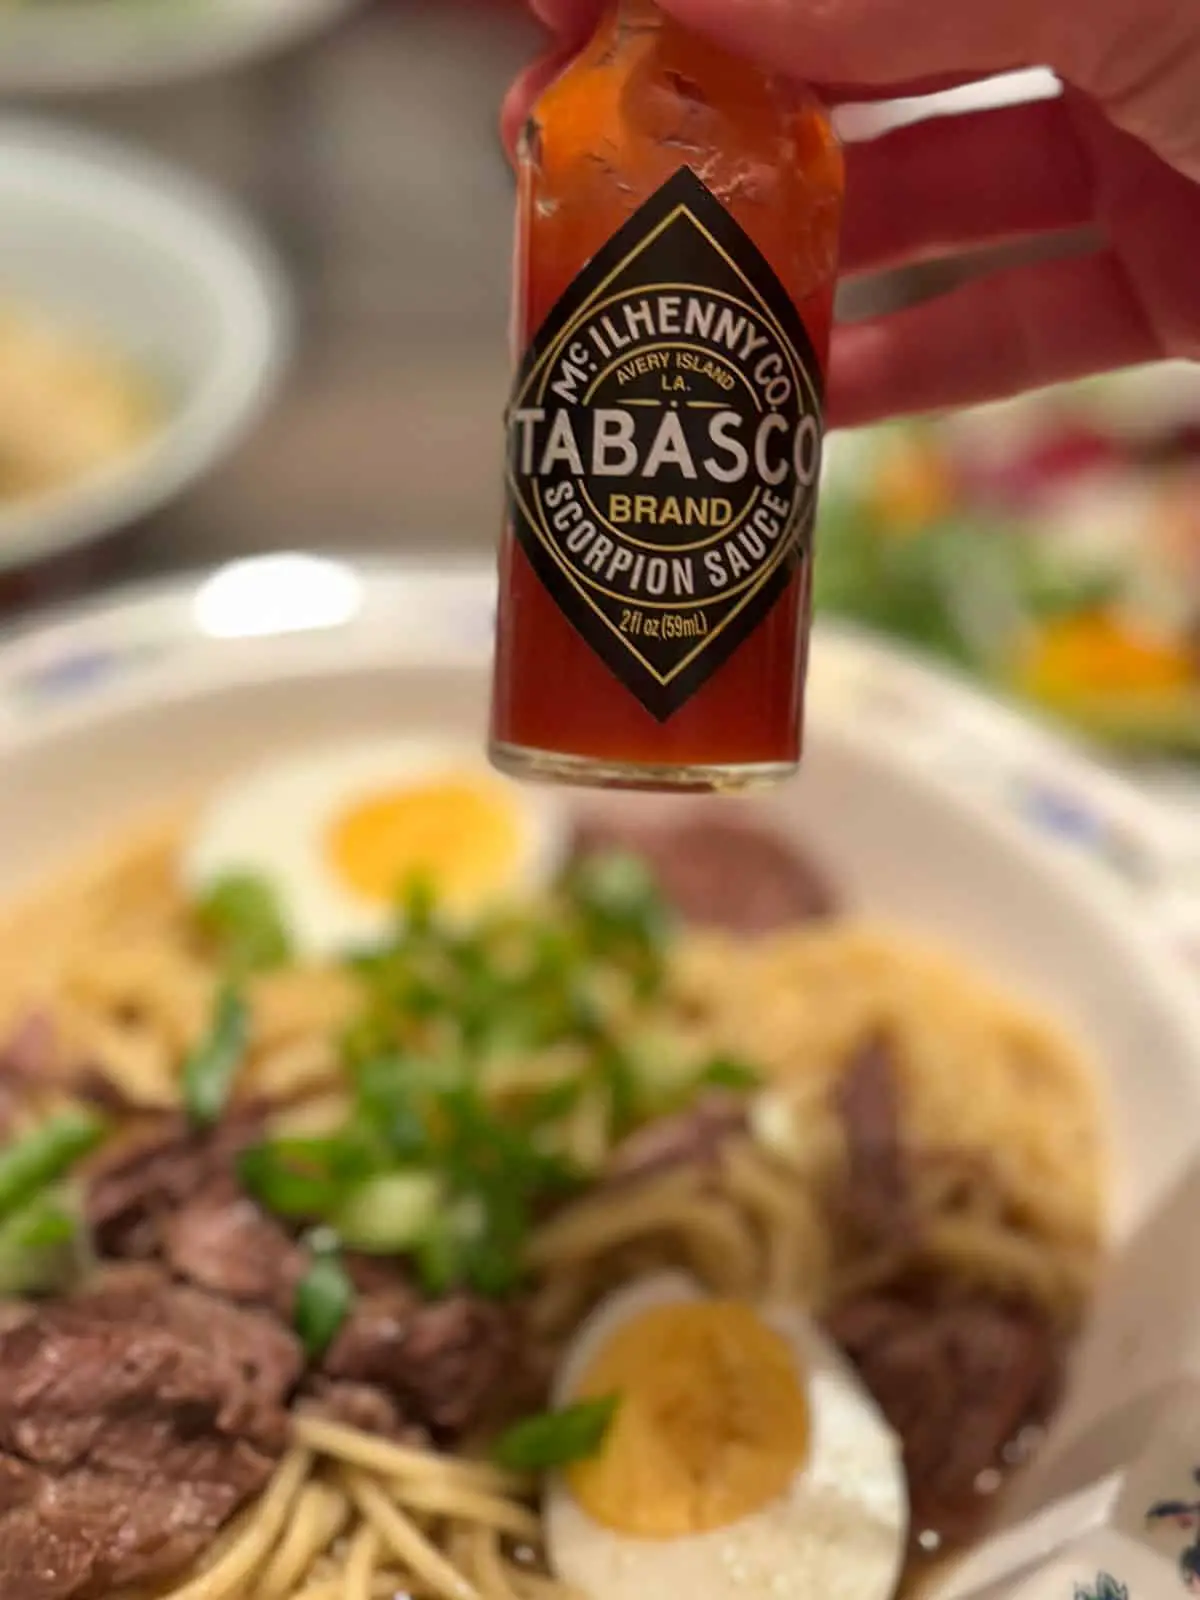 A bowl containing yakamein which is shredded beef and noodle soup garnished with hard boiled eggs and green onions and someone holding a bottle of Tabasco Scorpion Sauce over the bowl.